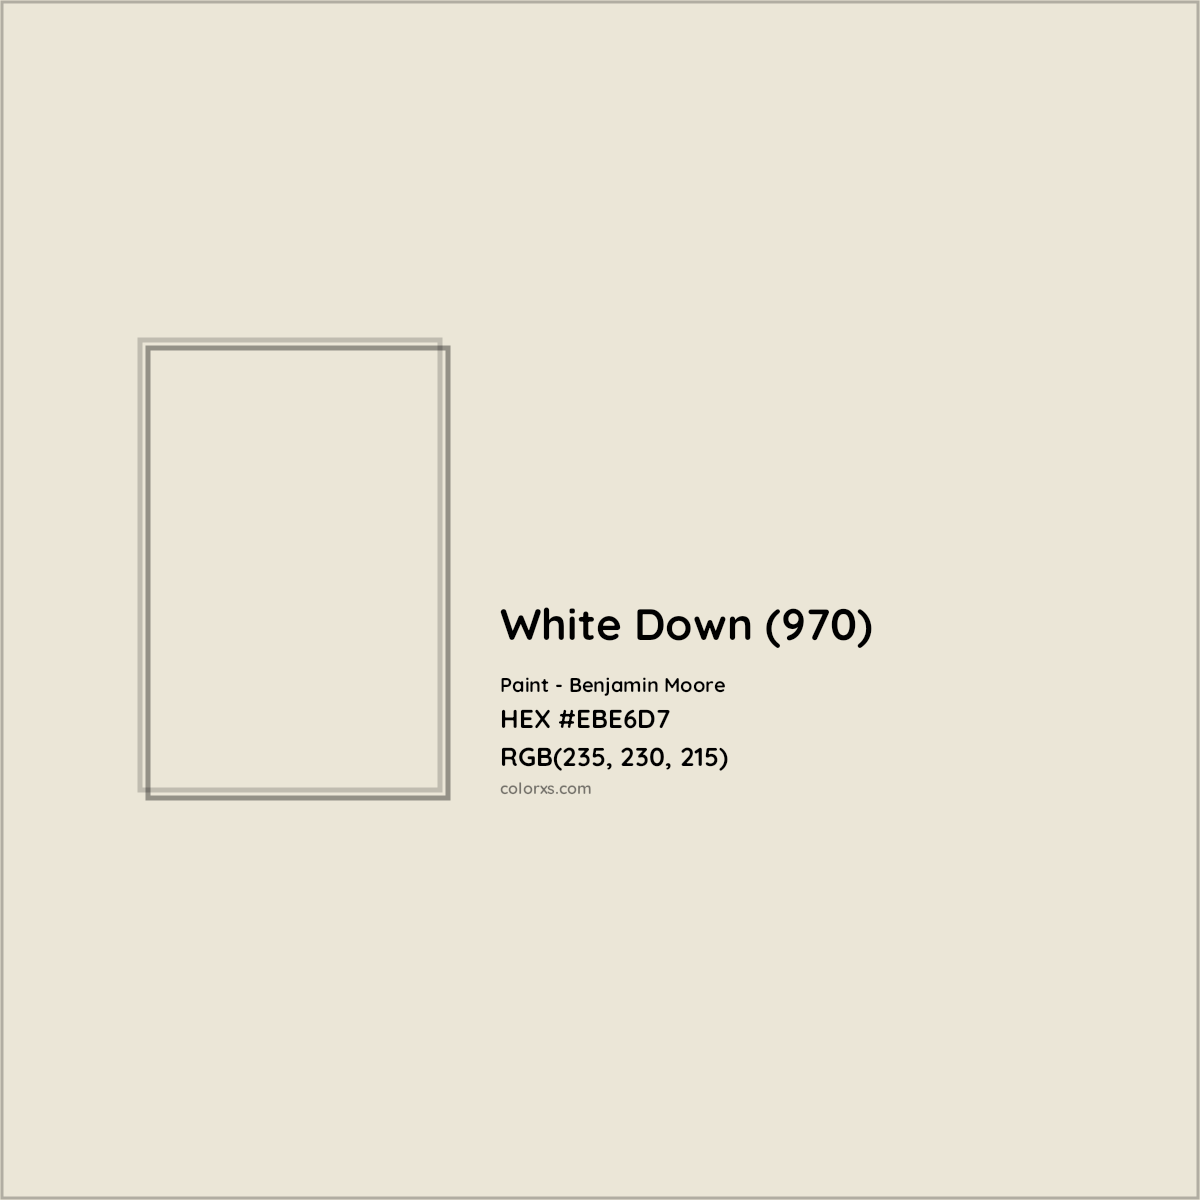 HEX #EBE6D7 White Down (970) Paint Benjamin Moore - Color Code